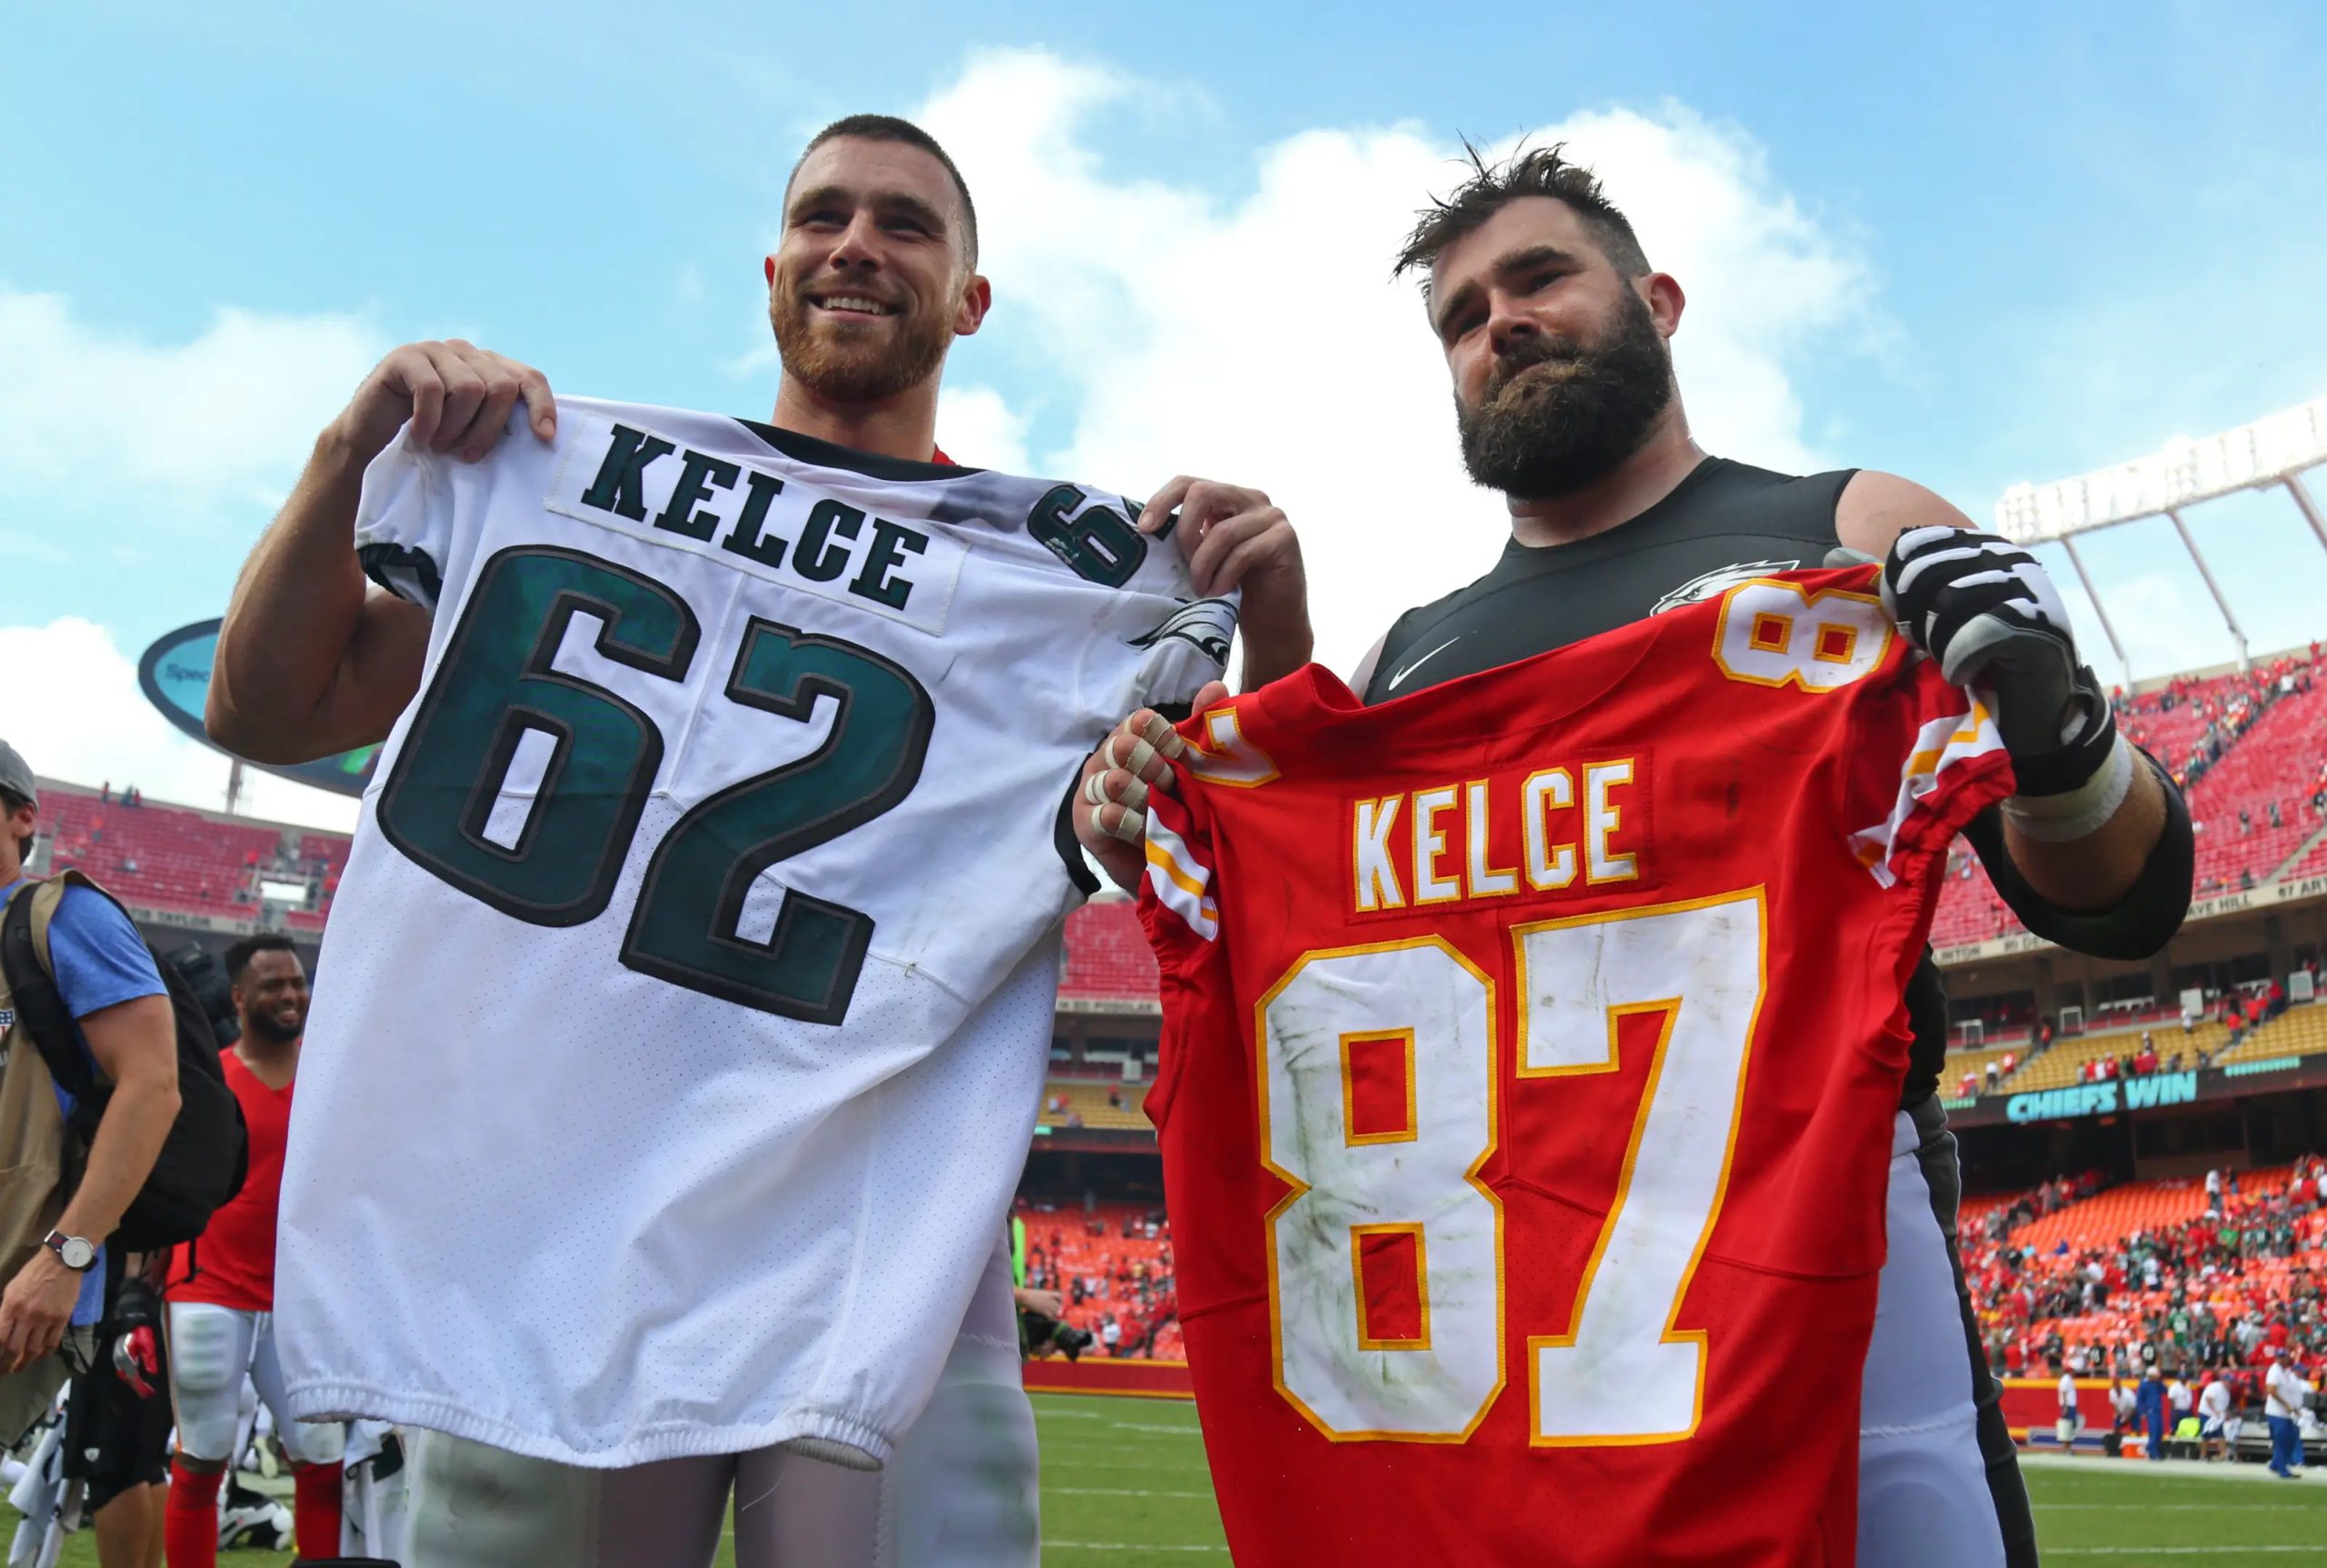 KELCE BROTHERS FACE-OFF IN SUPER BOWL LVII